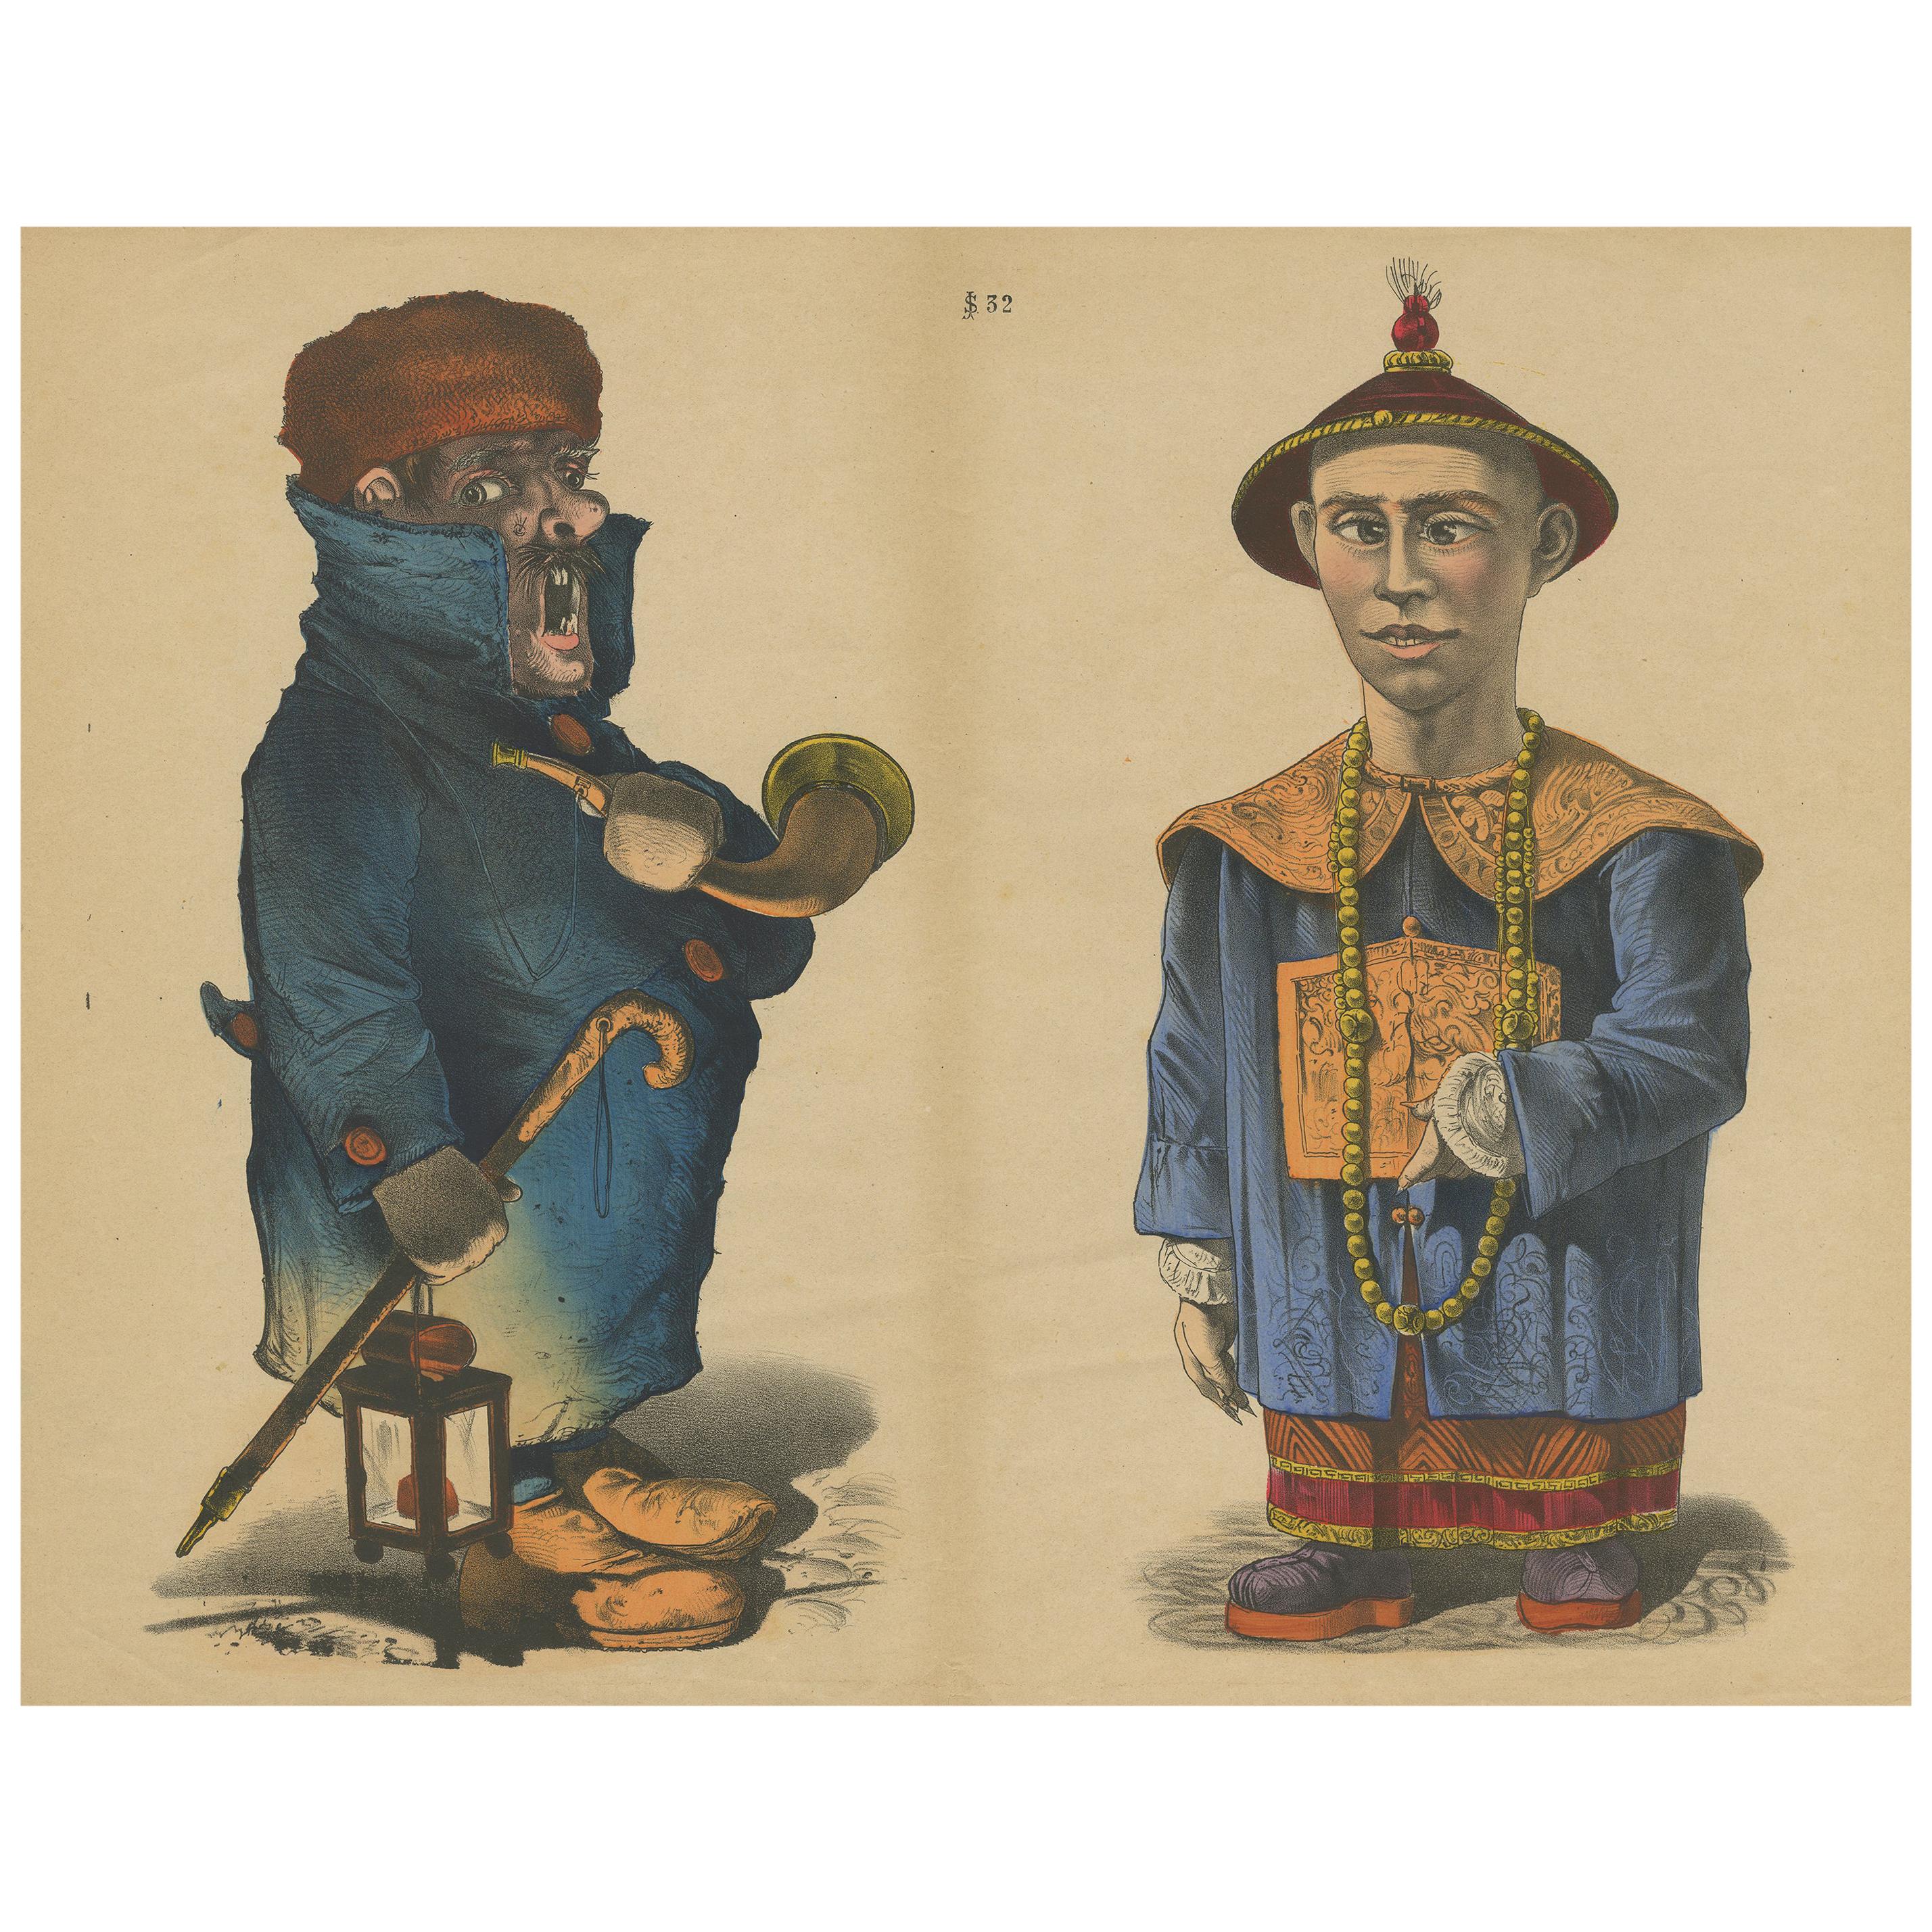 Antique Caricature Print of a Man with Horn and Asian Native 'c.1860' For Sale